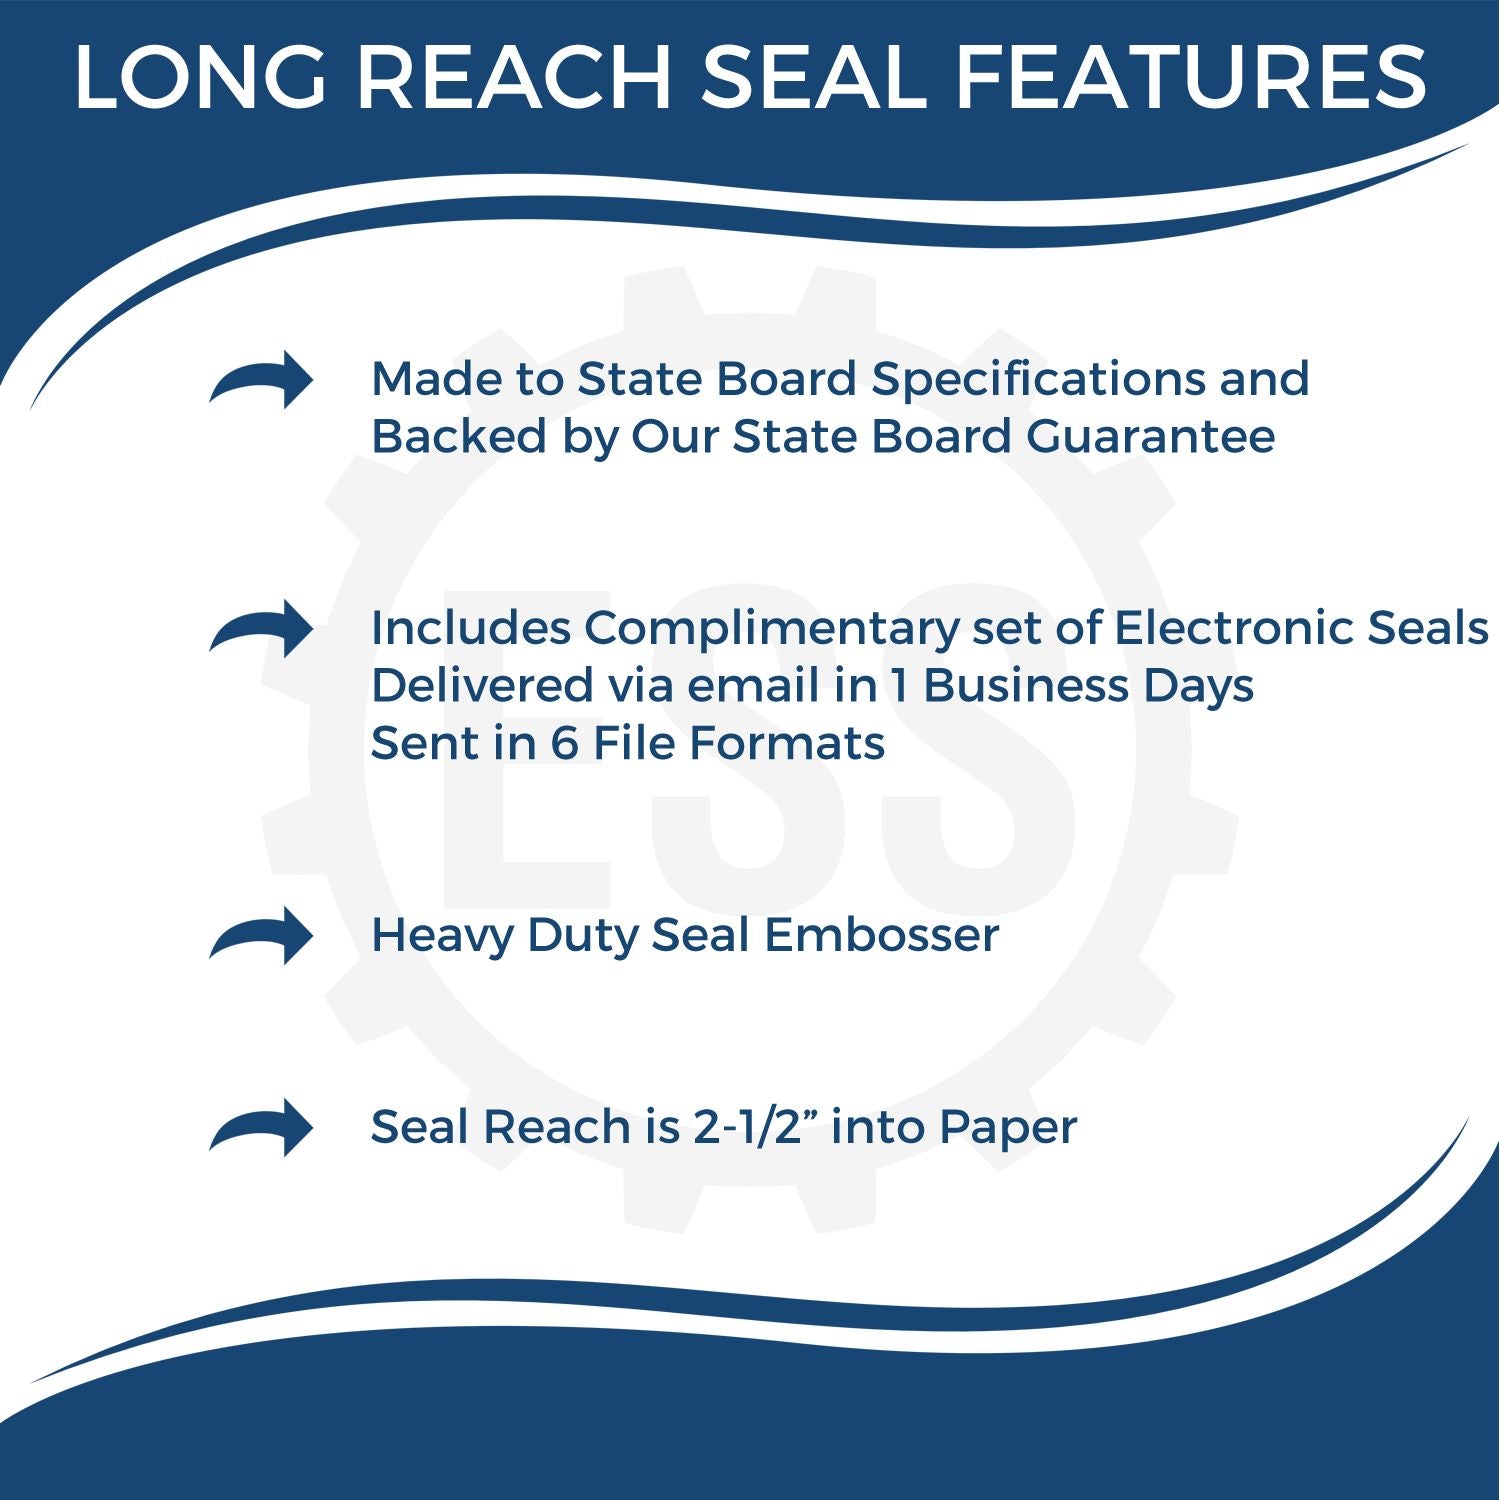 The main image for the Long Reach New Jersey PE Seal depicting a sample of the imprint and electronic files